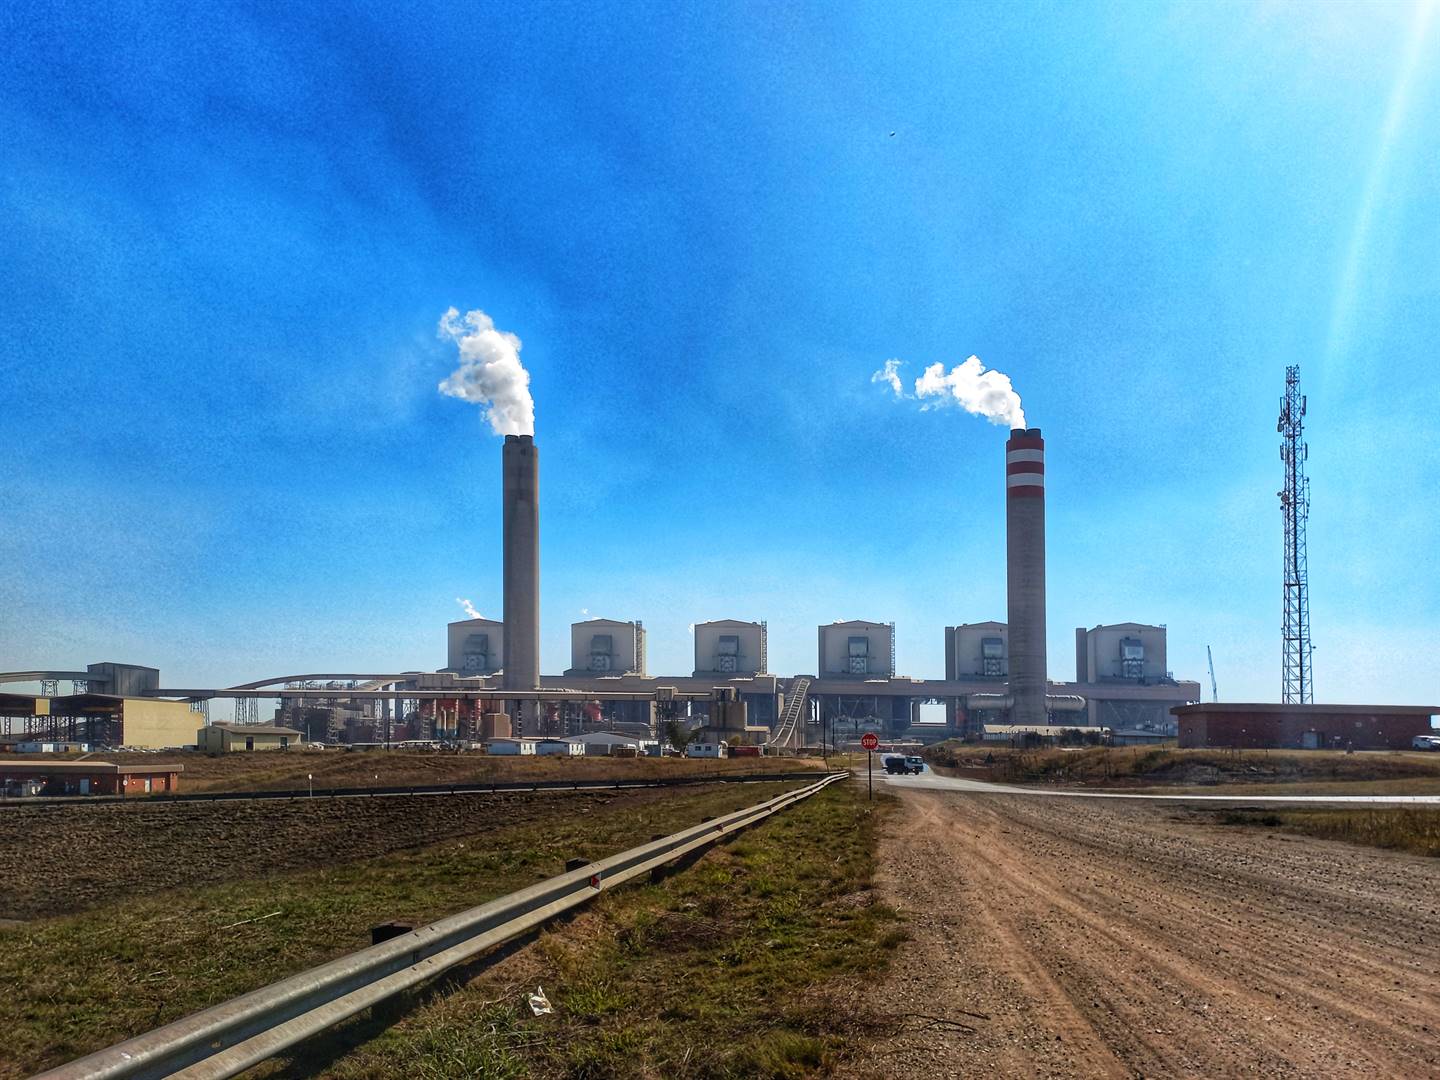 News24 | More than R160 billion later Kusile still not faring well, even if Eskom says it is 